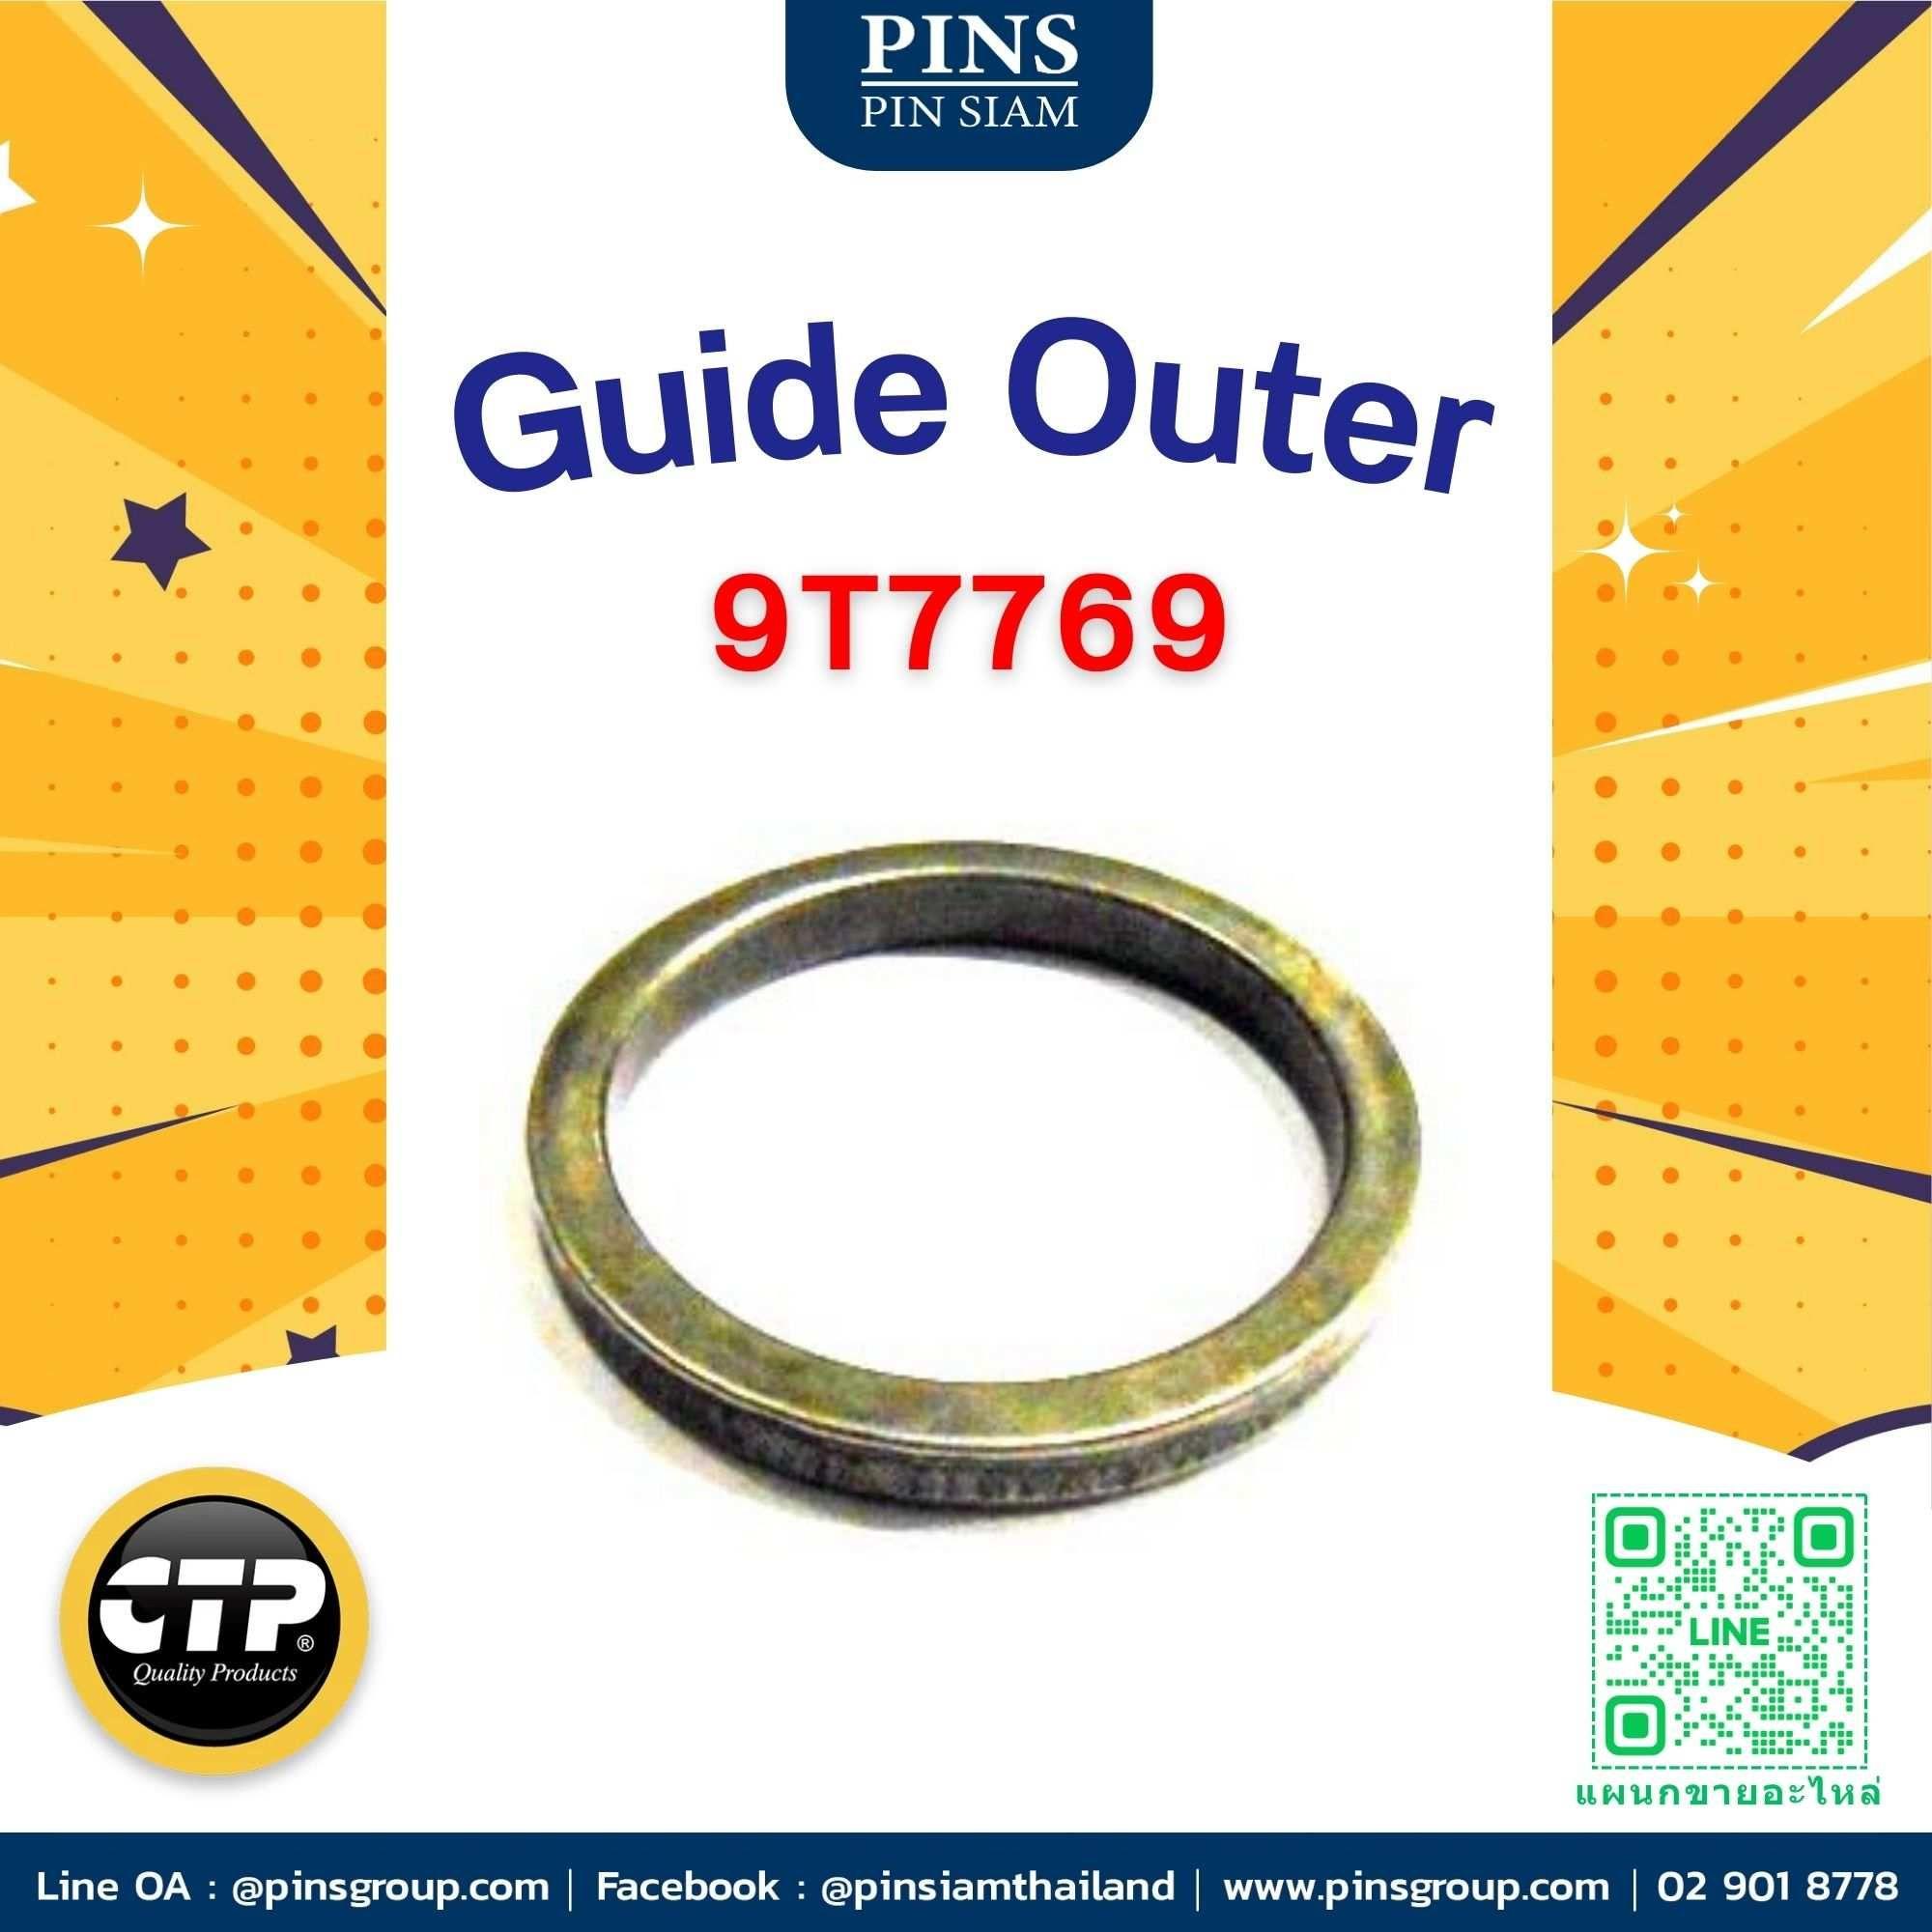 Guide Outer